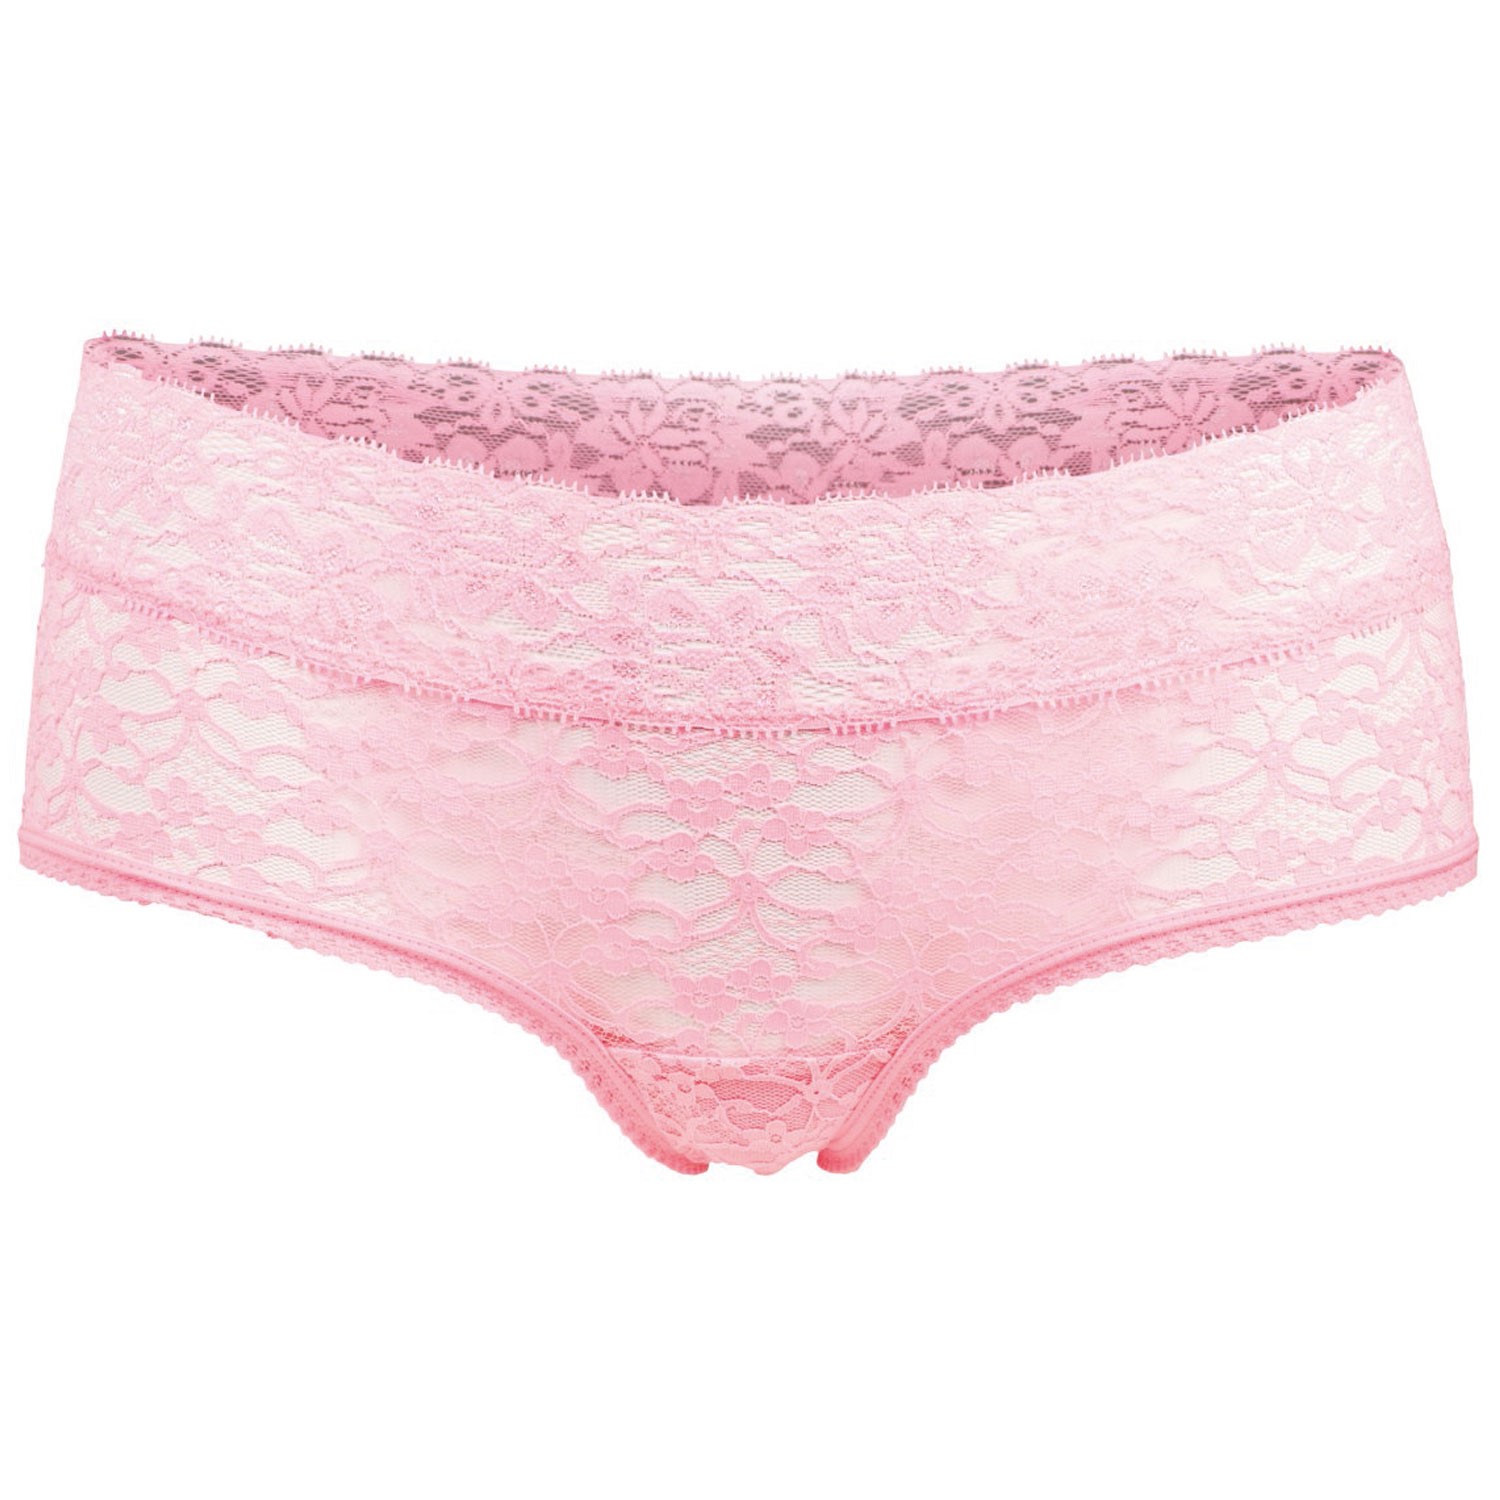 Björn Borg Love All Lace Hotpant 131184 Light Pink